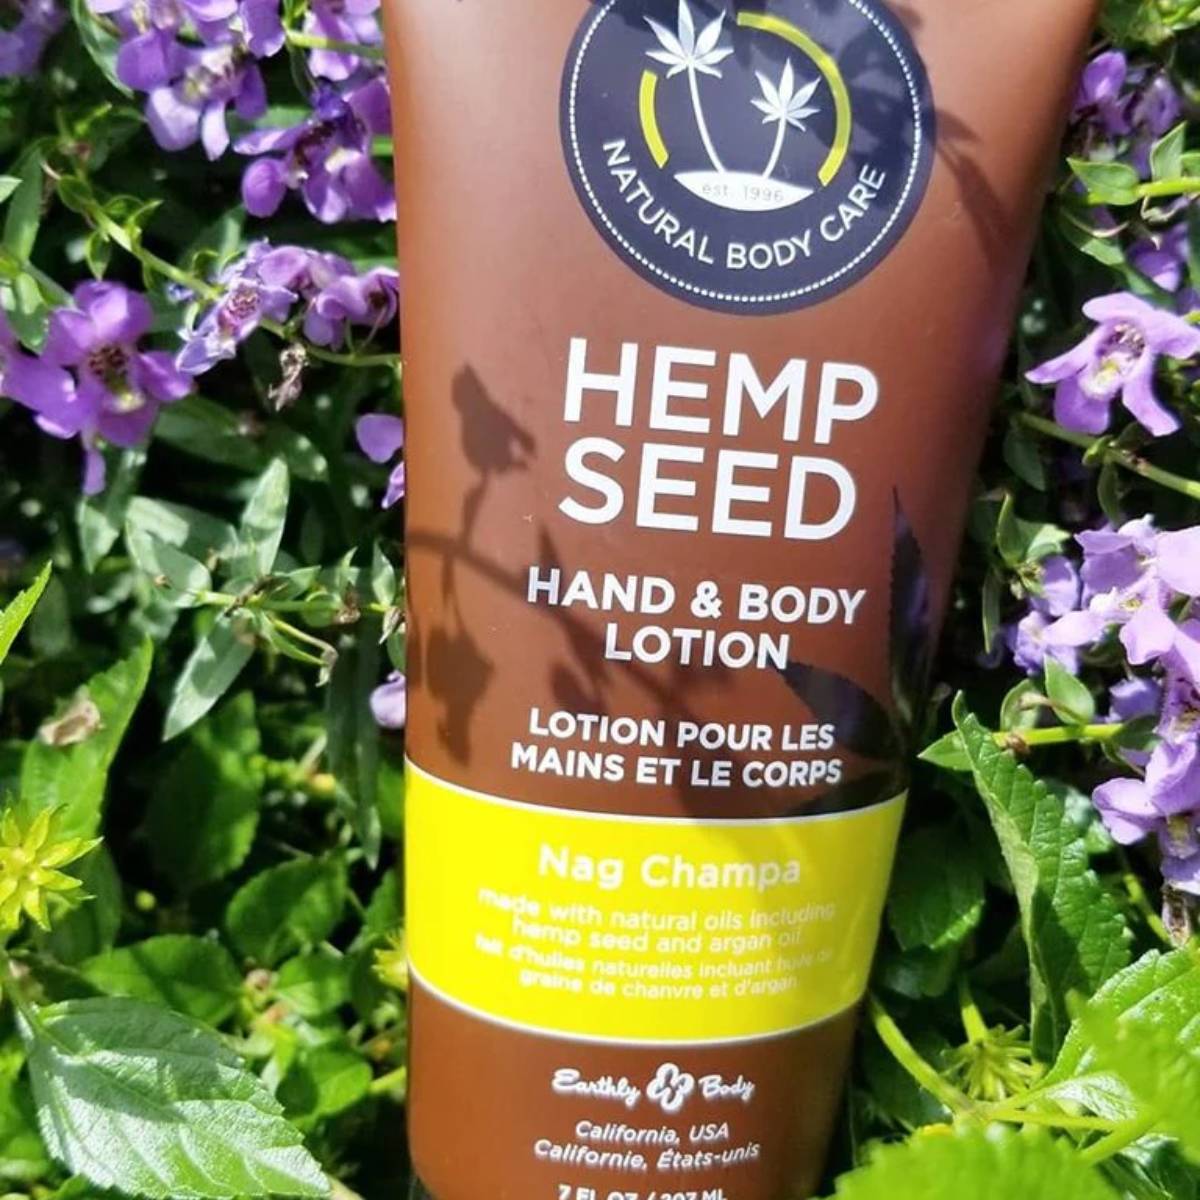 Product Image of Hemp Seed Hand & Body Lotion Nag Champa Scent